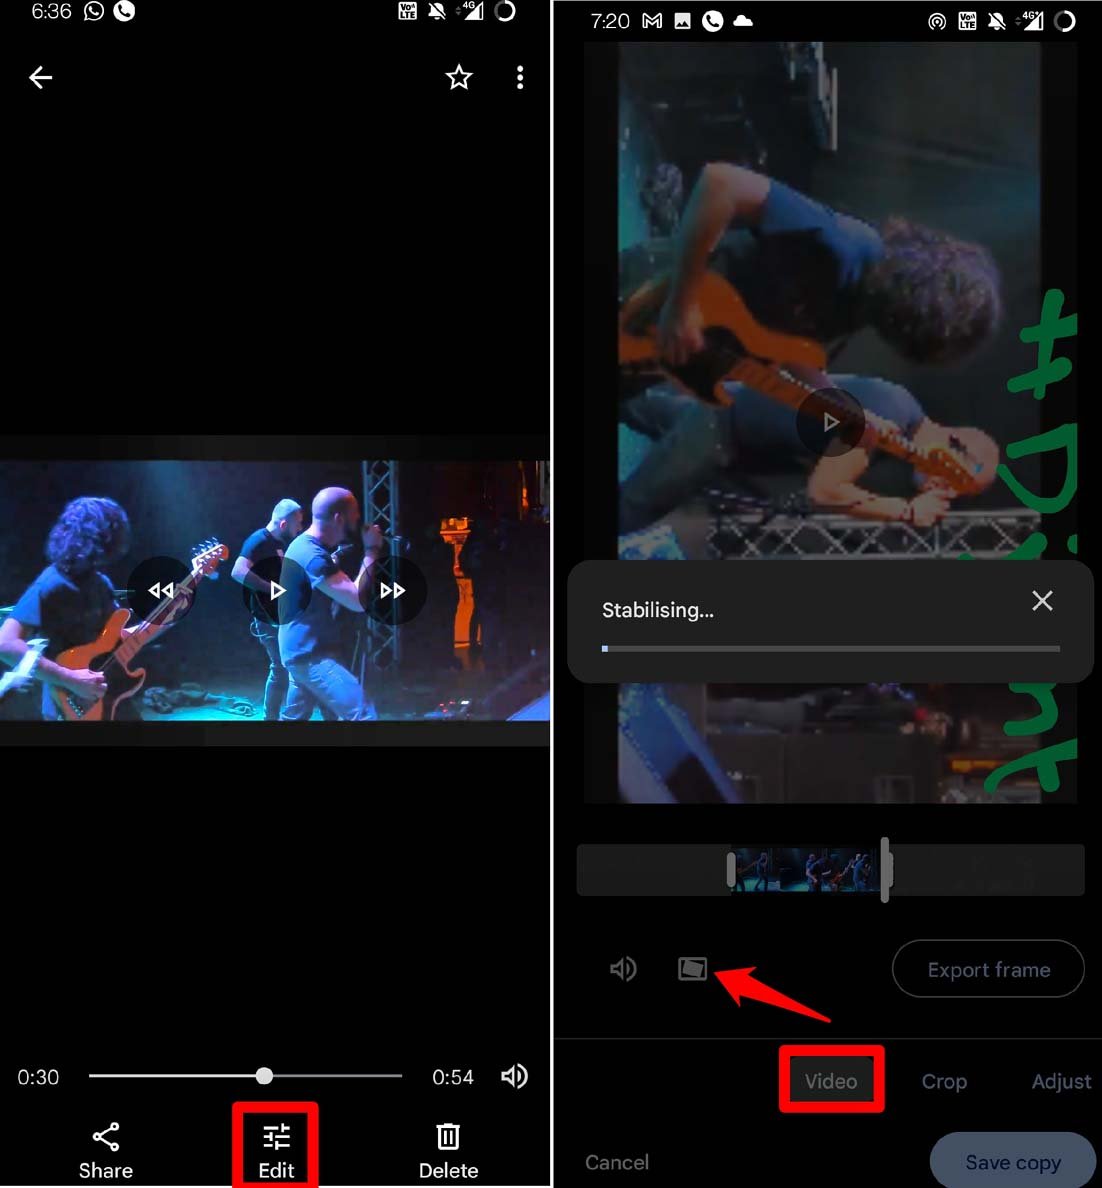 how to stabilize a video in Google Photos